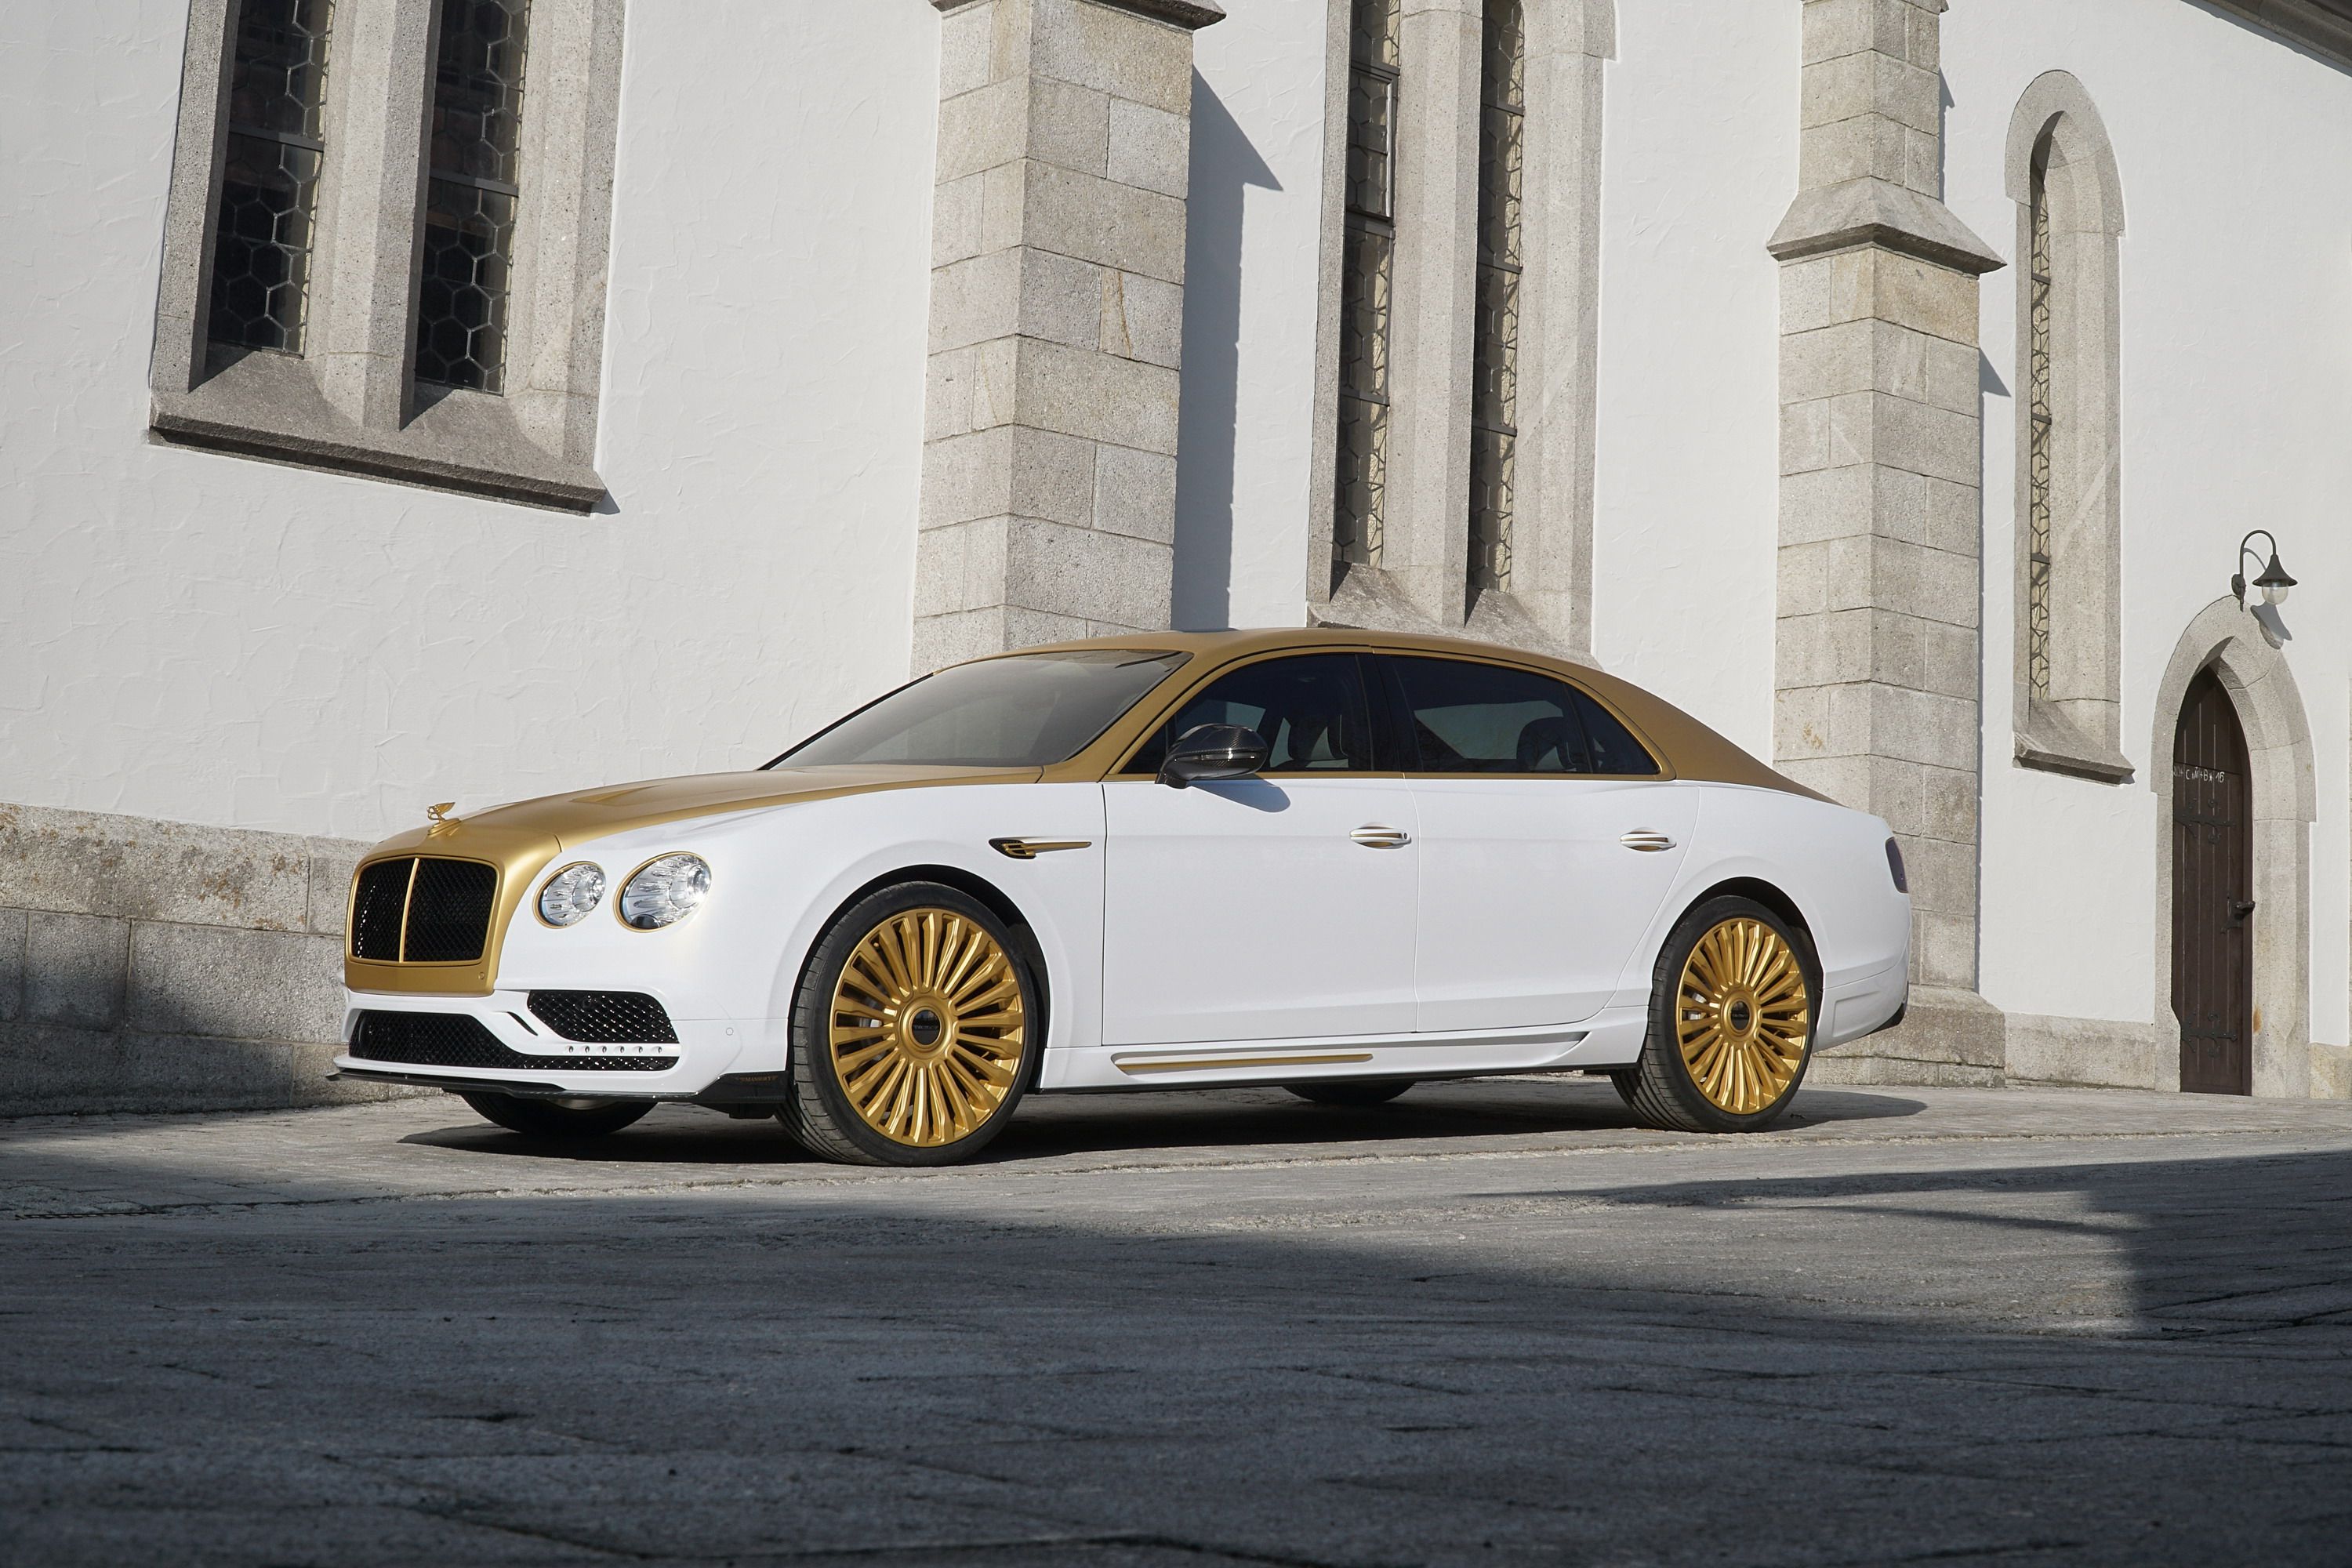 2016 Bentley Flying Spur by Mansory